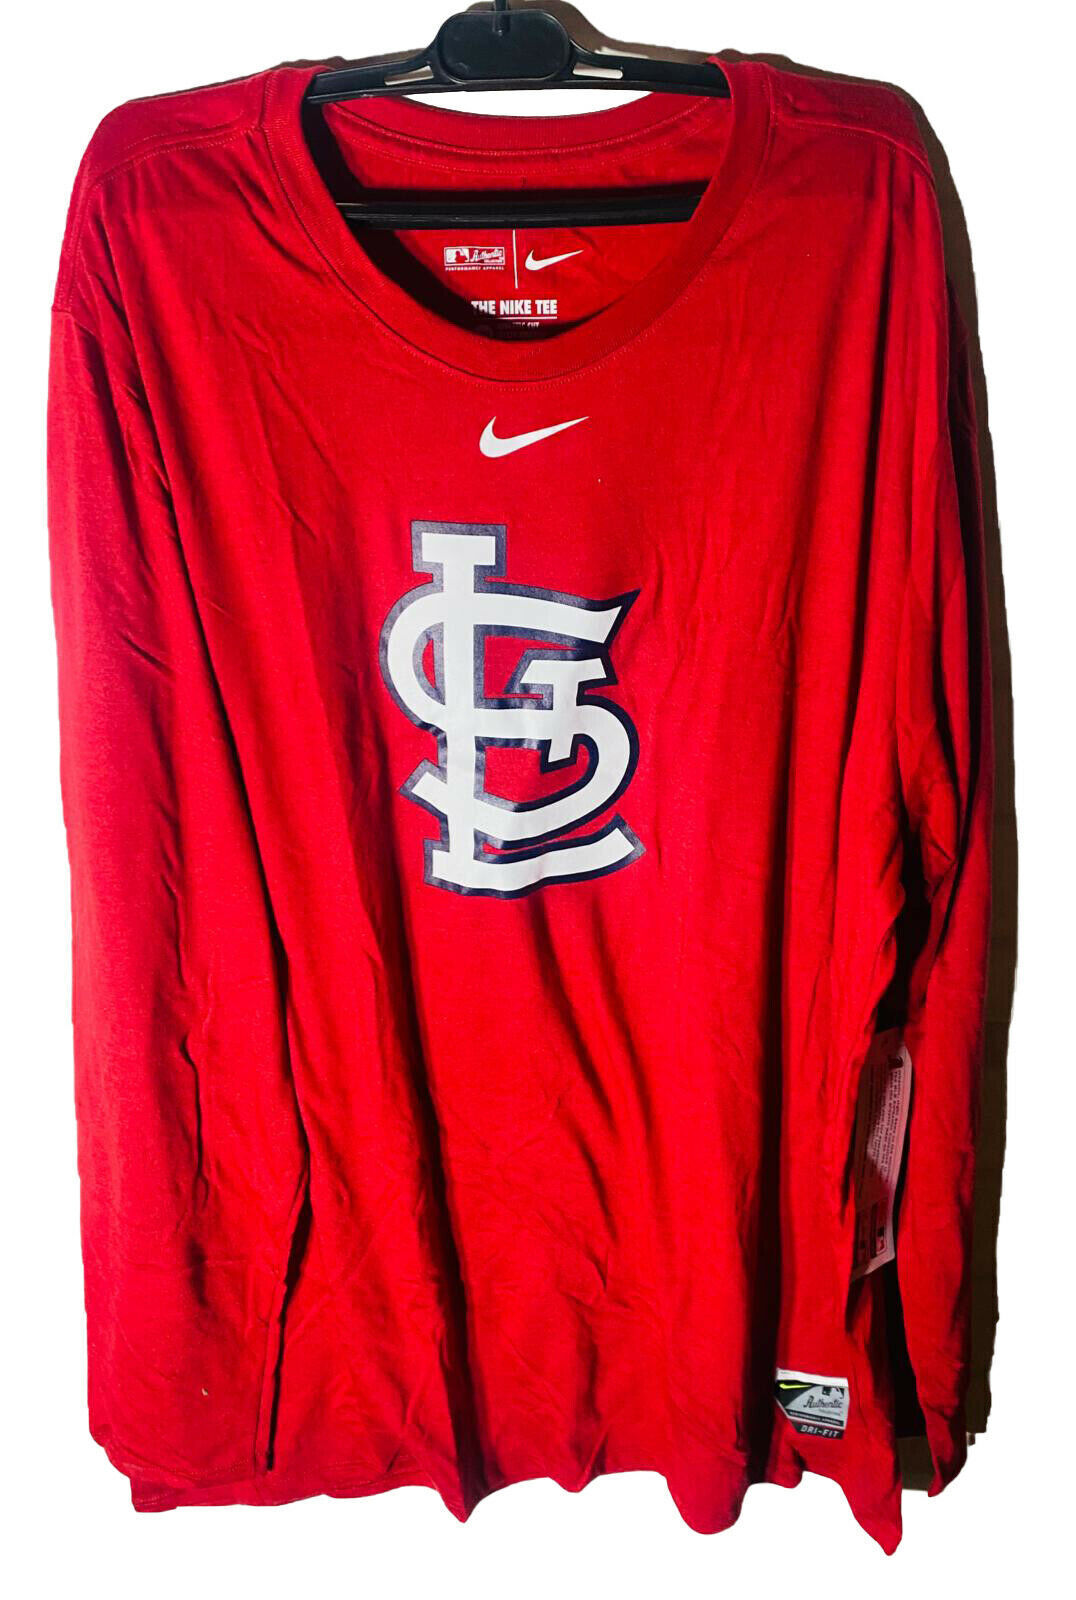 Nike Men's St. Louis Cardinals Authentic Collection Dri-FIT Long-Sleeve 2XL  RED